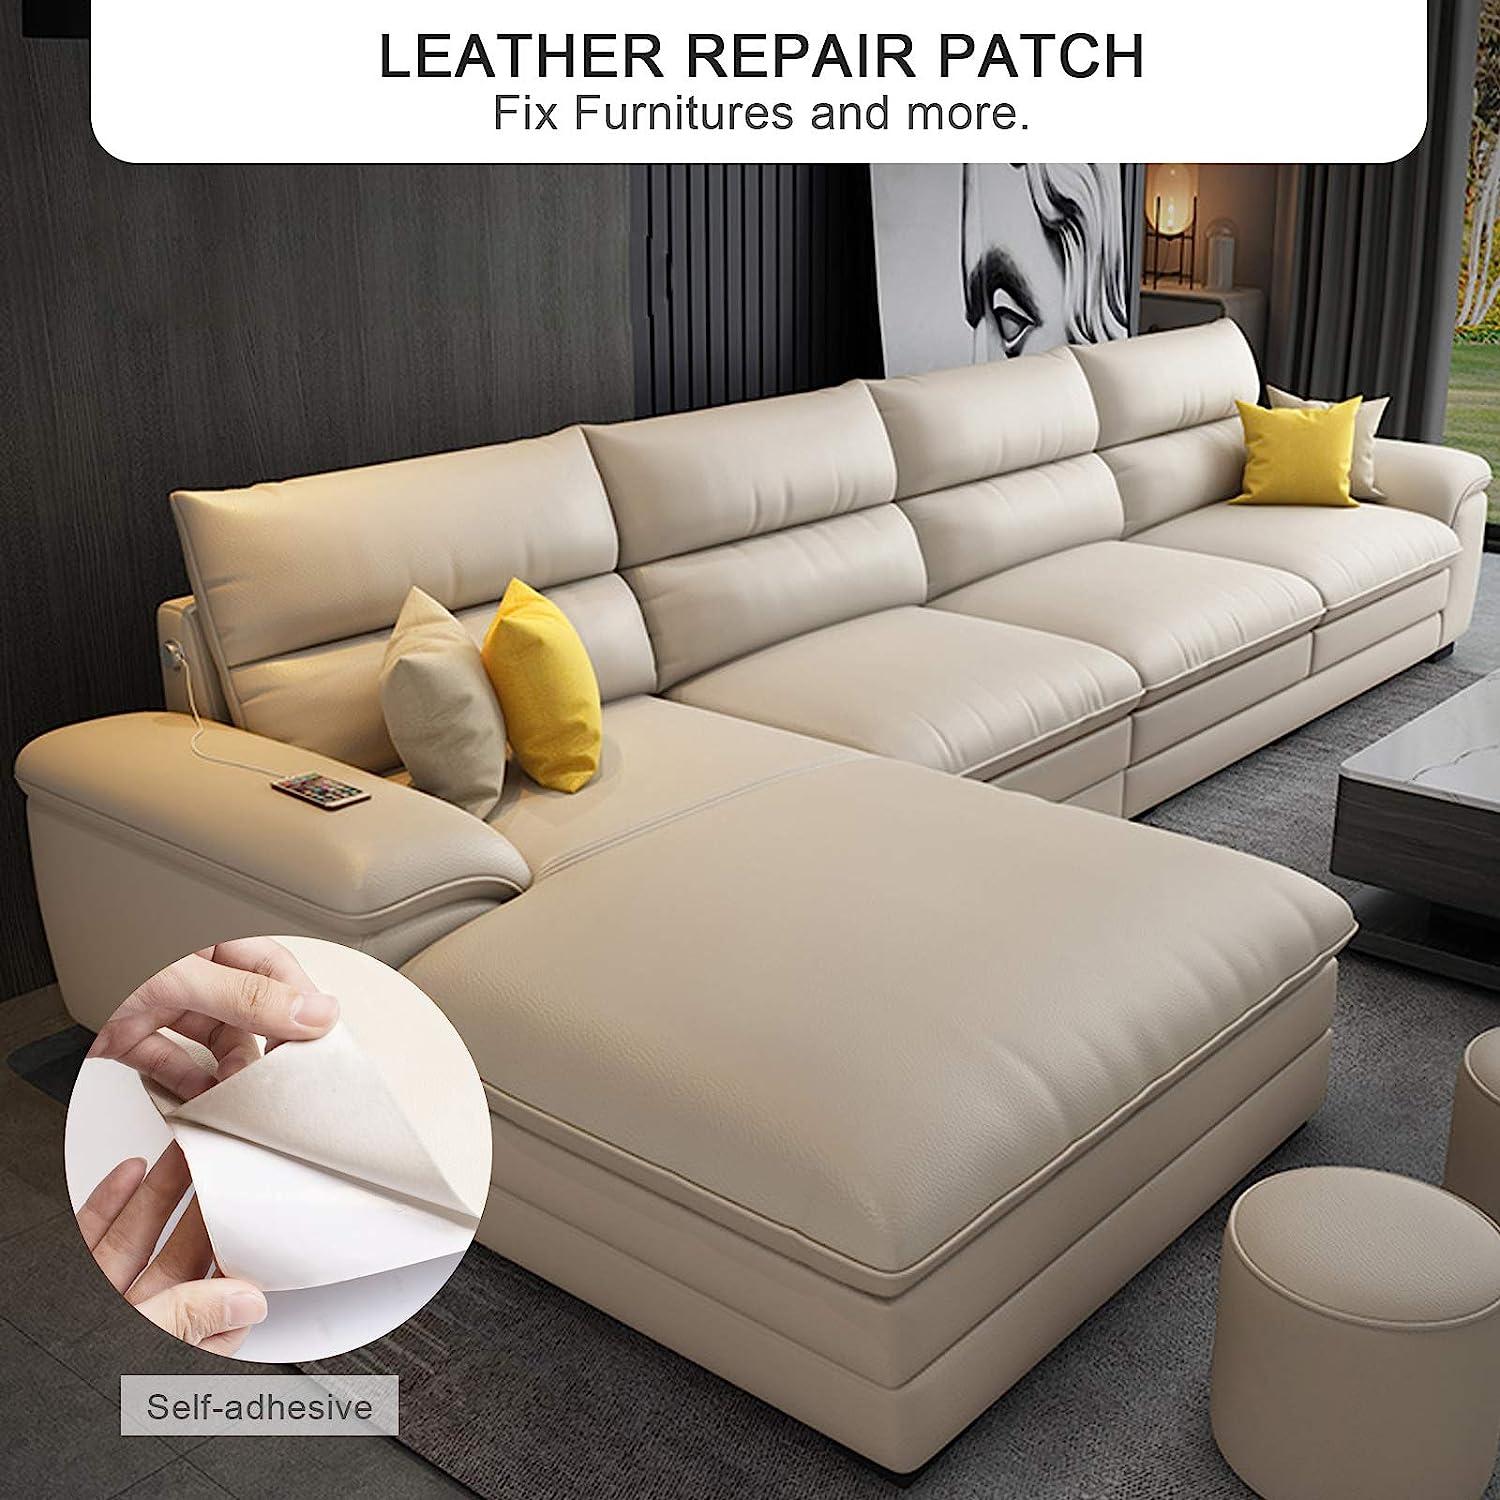 Joy Decor Self Adhesive Leather Repair Patch, 17X79 inch Leather Repair  Patch Leather Patches for Furniture, Large Leather Patch Tape for Sofa,  Couch